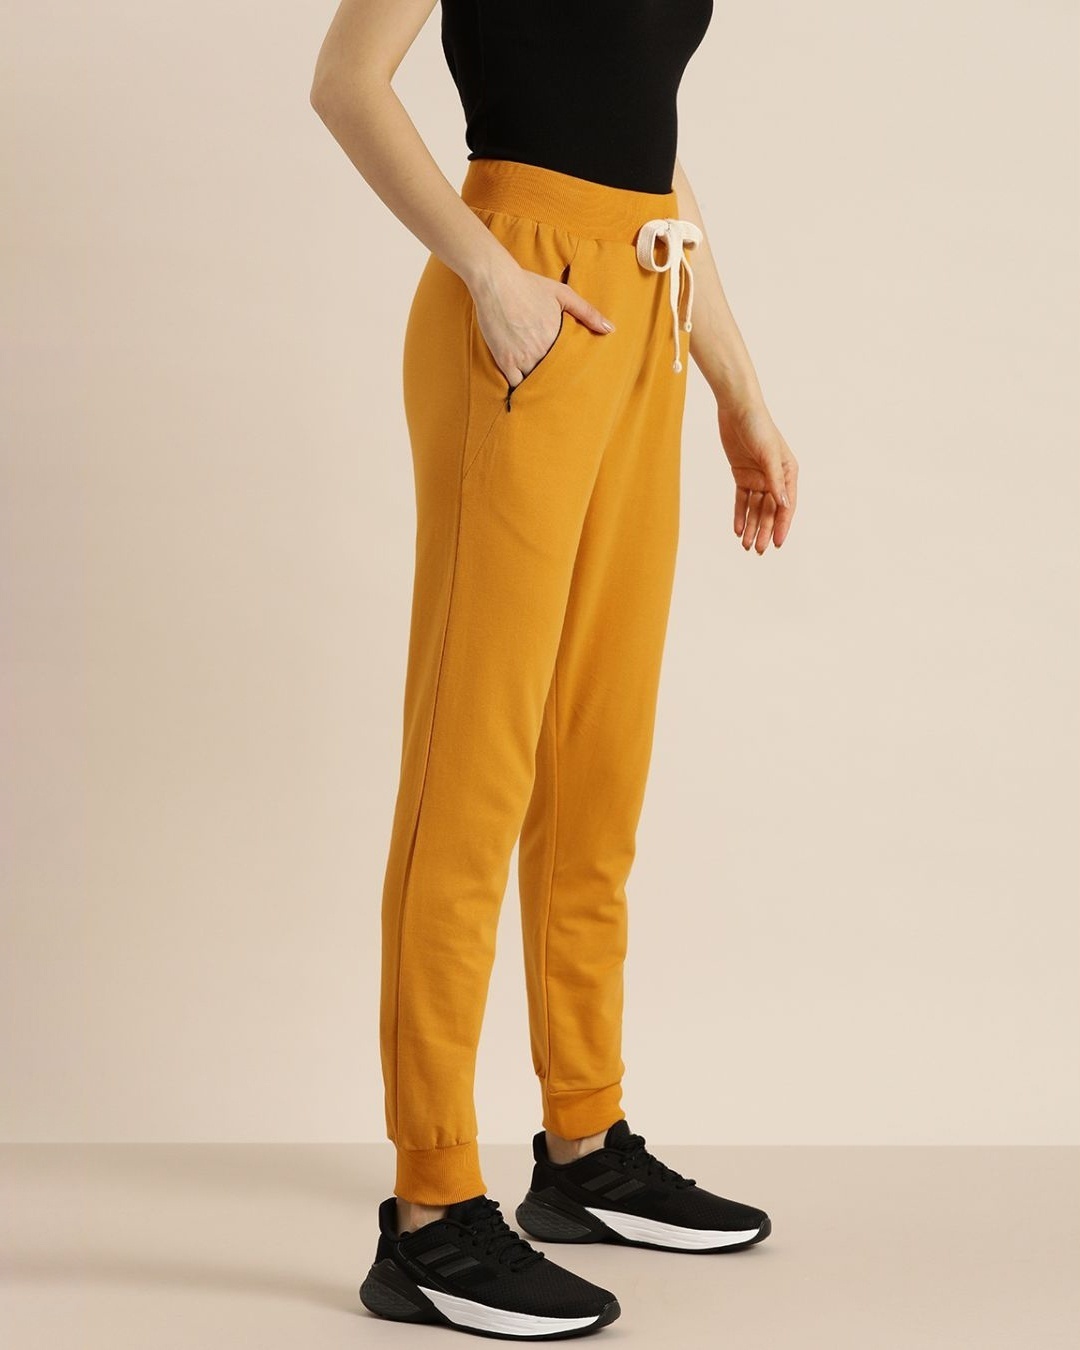 Shop Women's Yellow Solid Joggers-Design